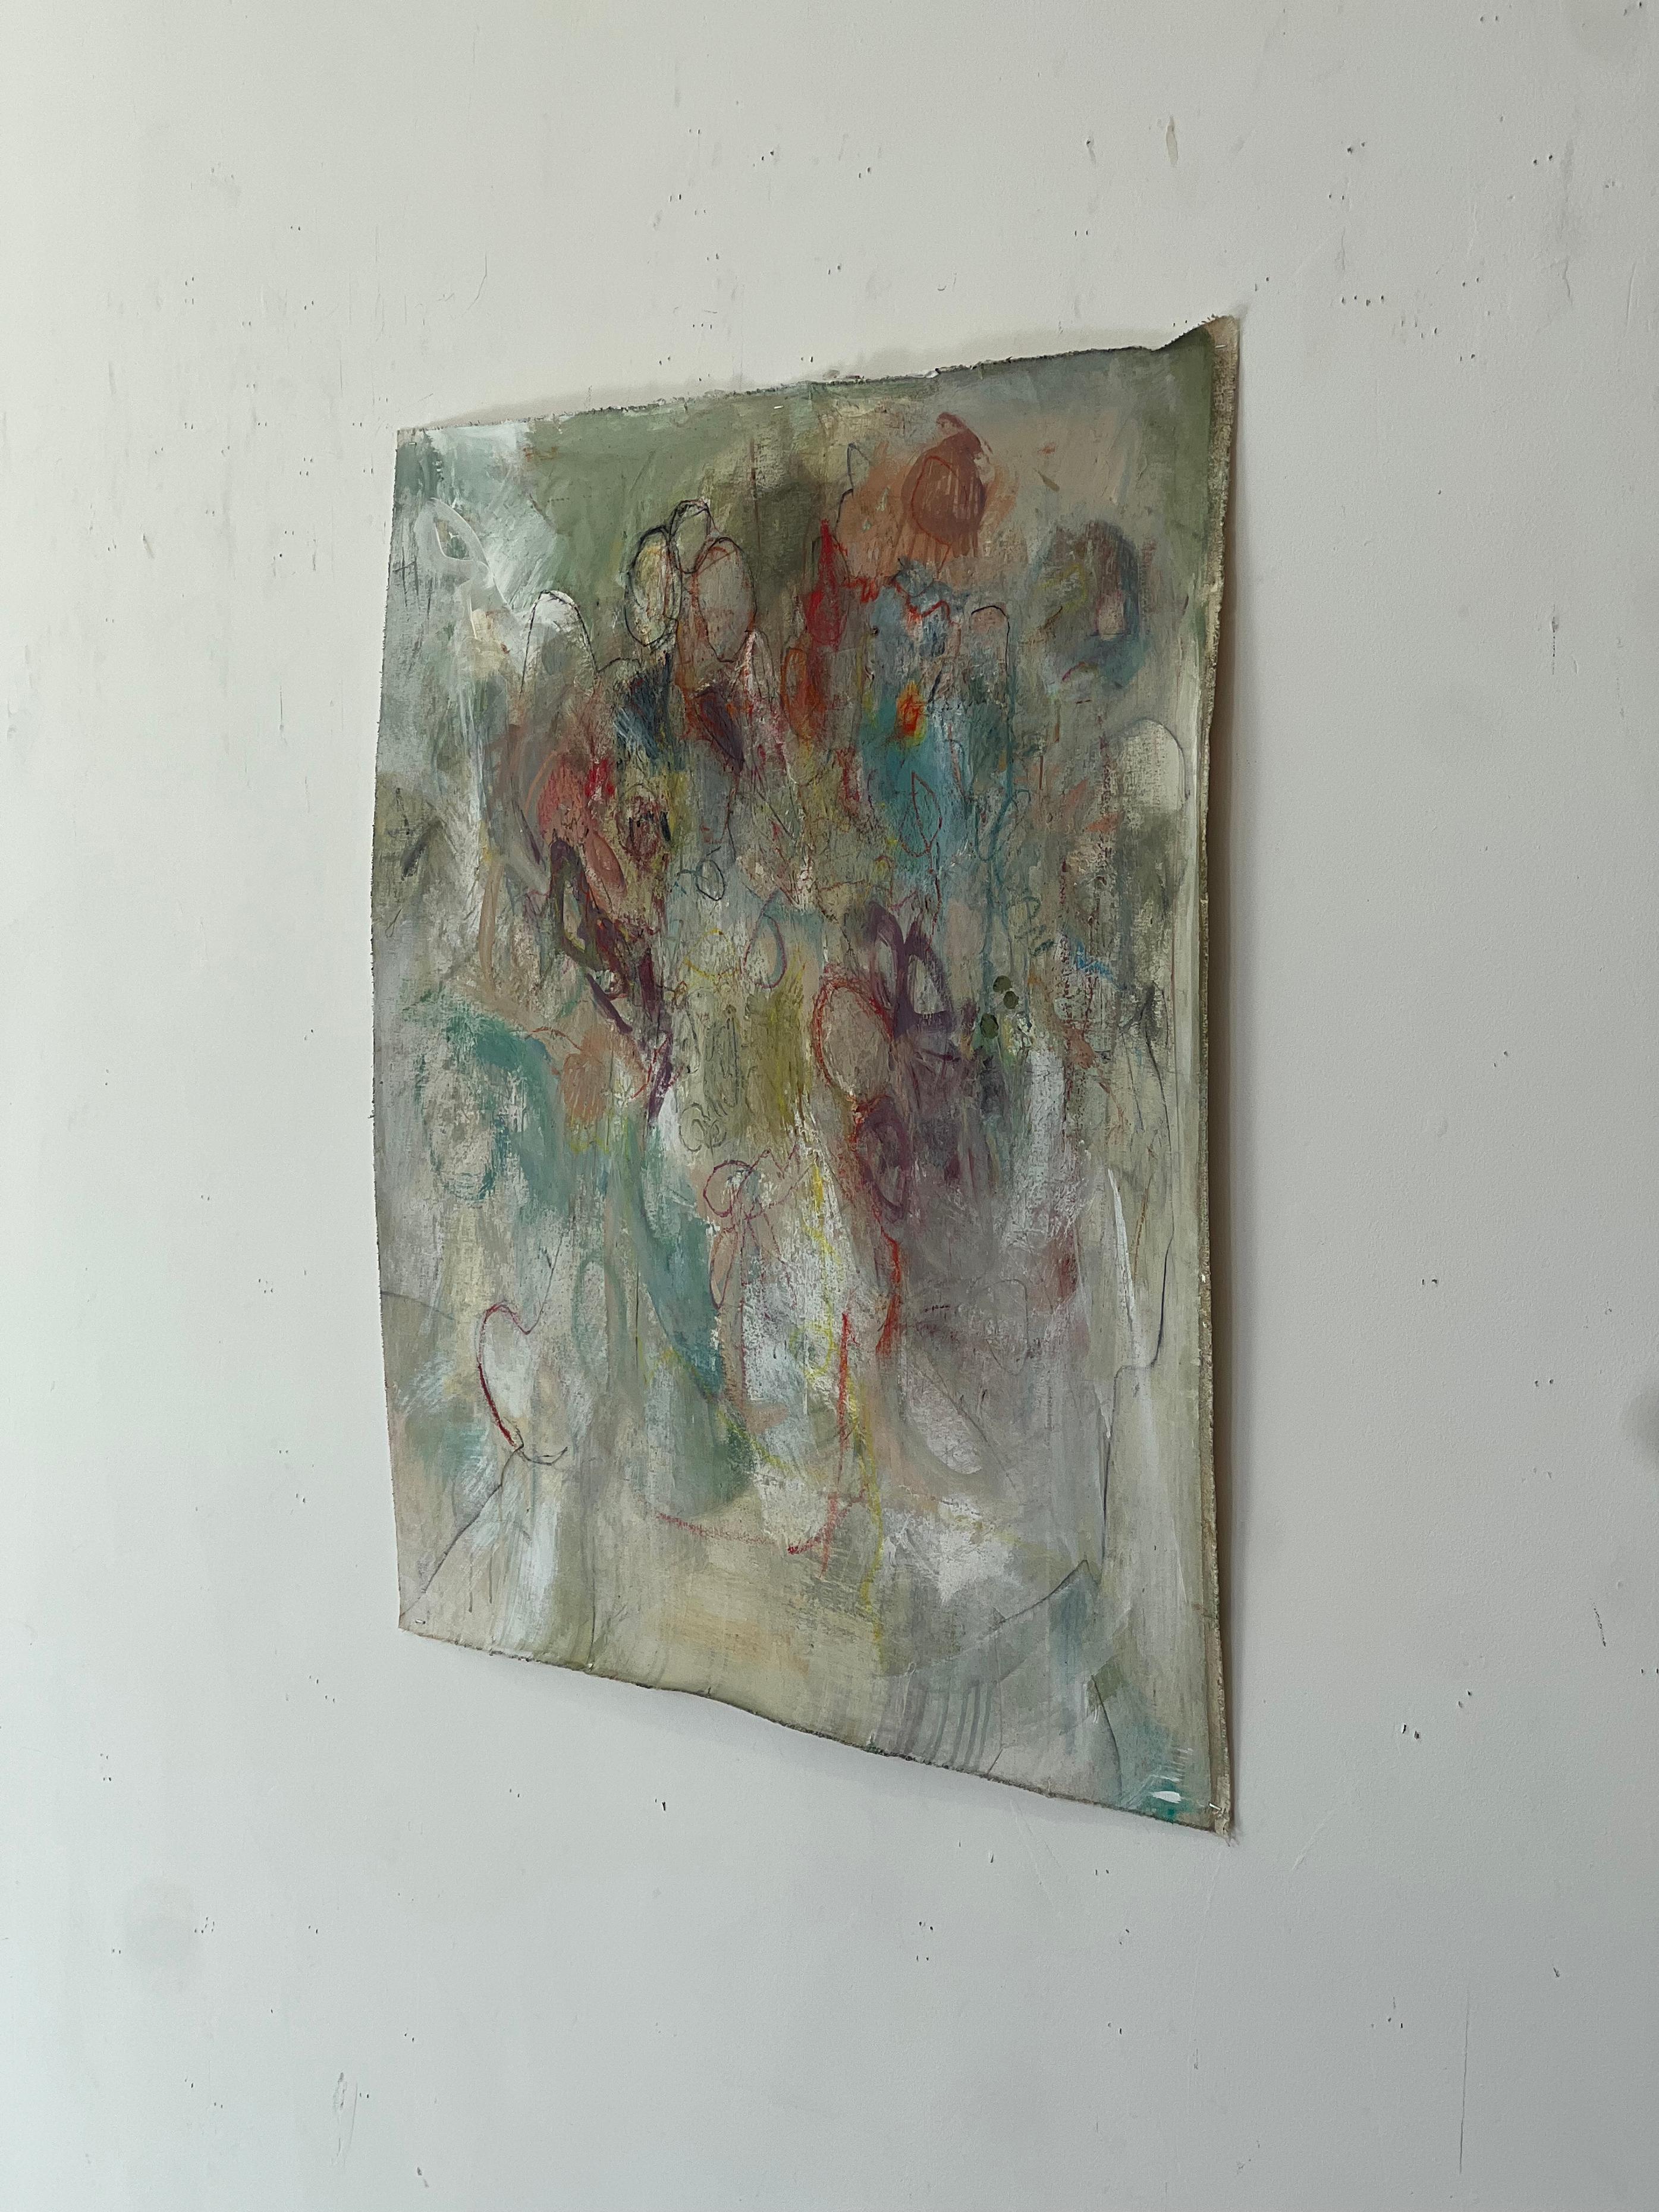 Untitled #10- acrylic on canvas - Painting by Stephanie Visser 